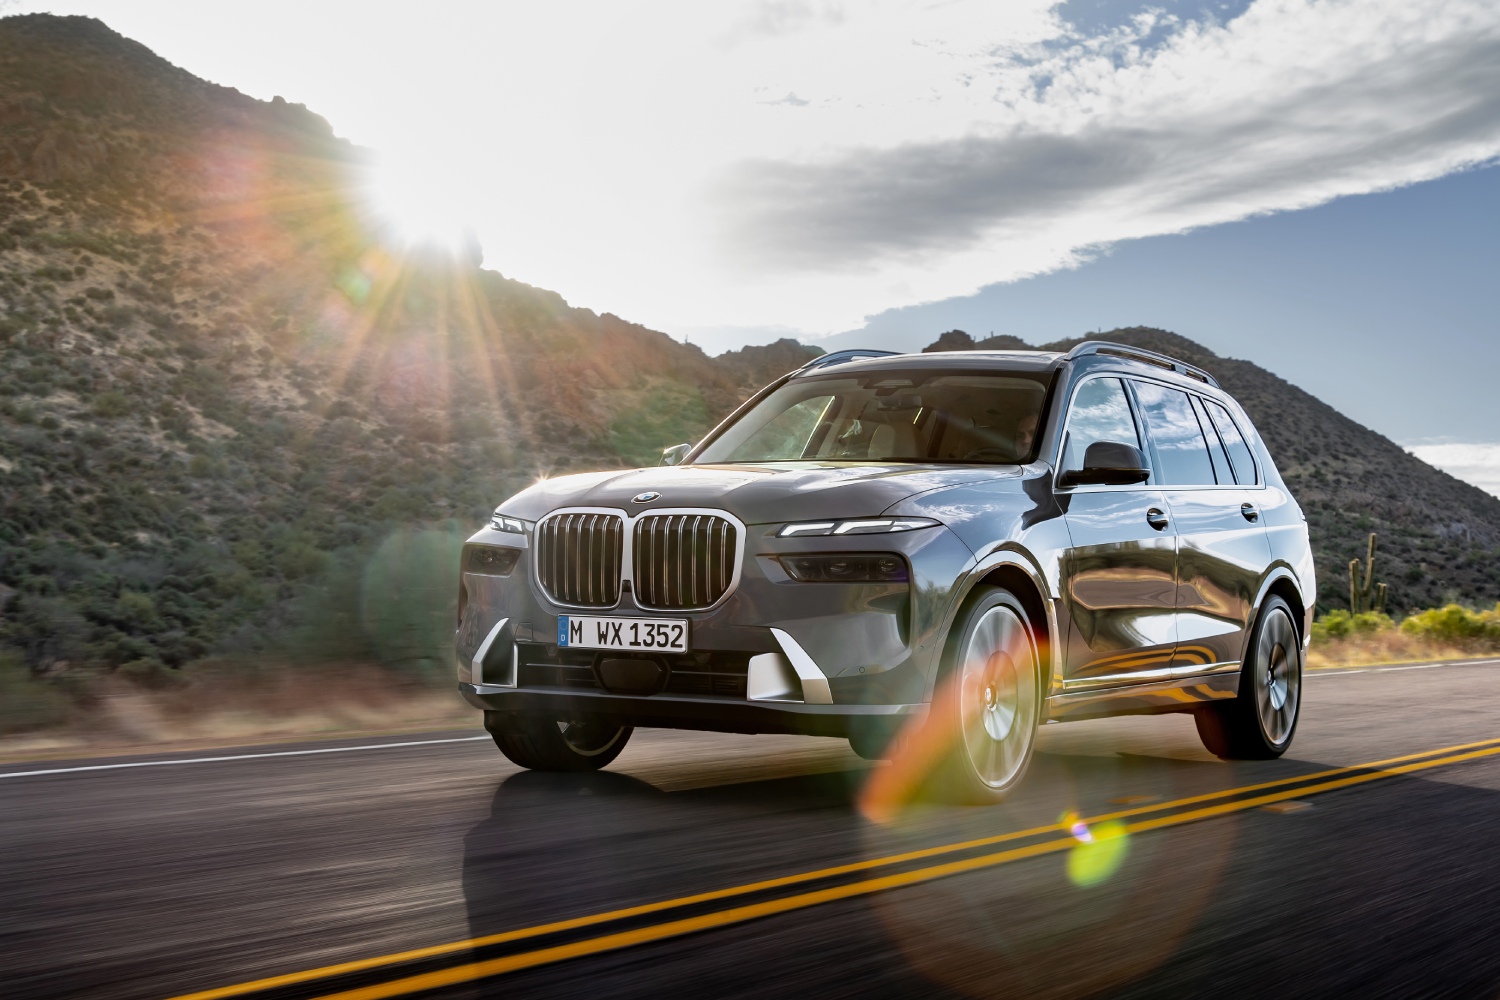 This BMW X7 is a seven-passenger SUV